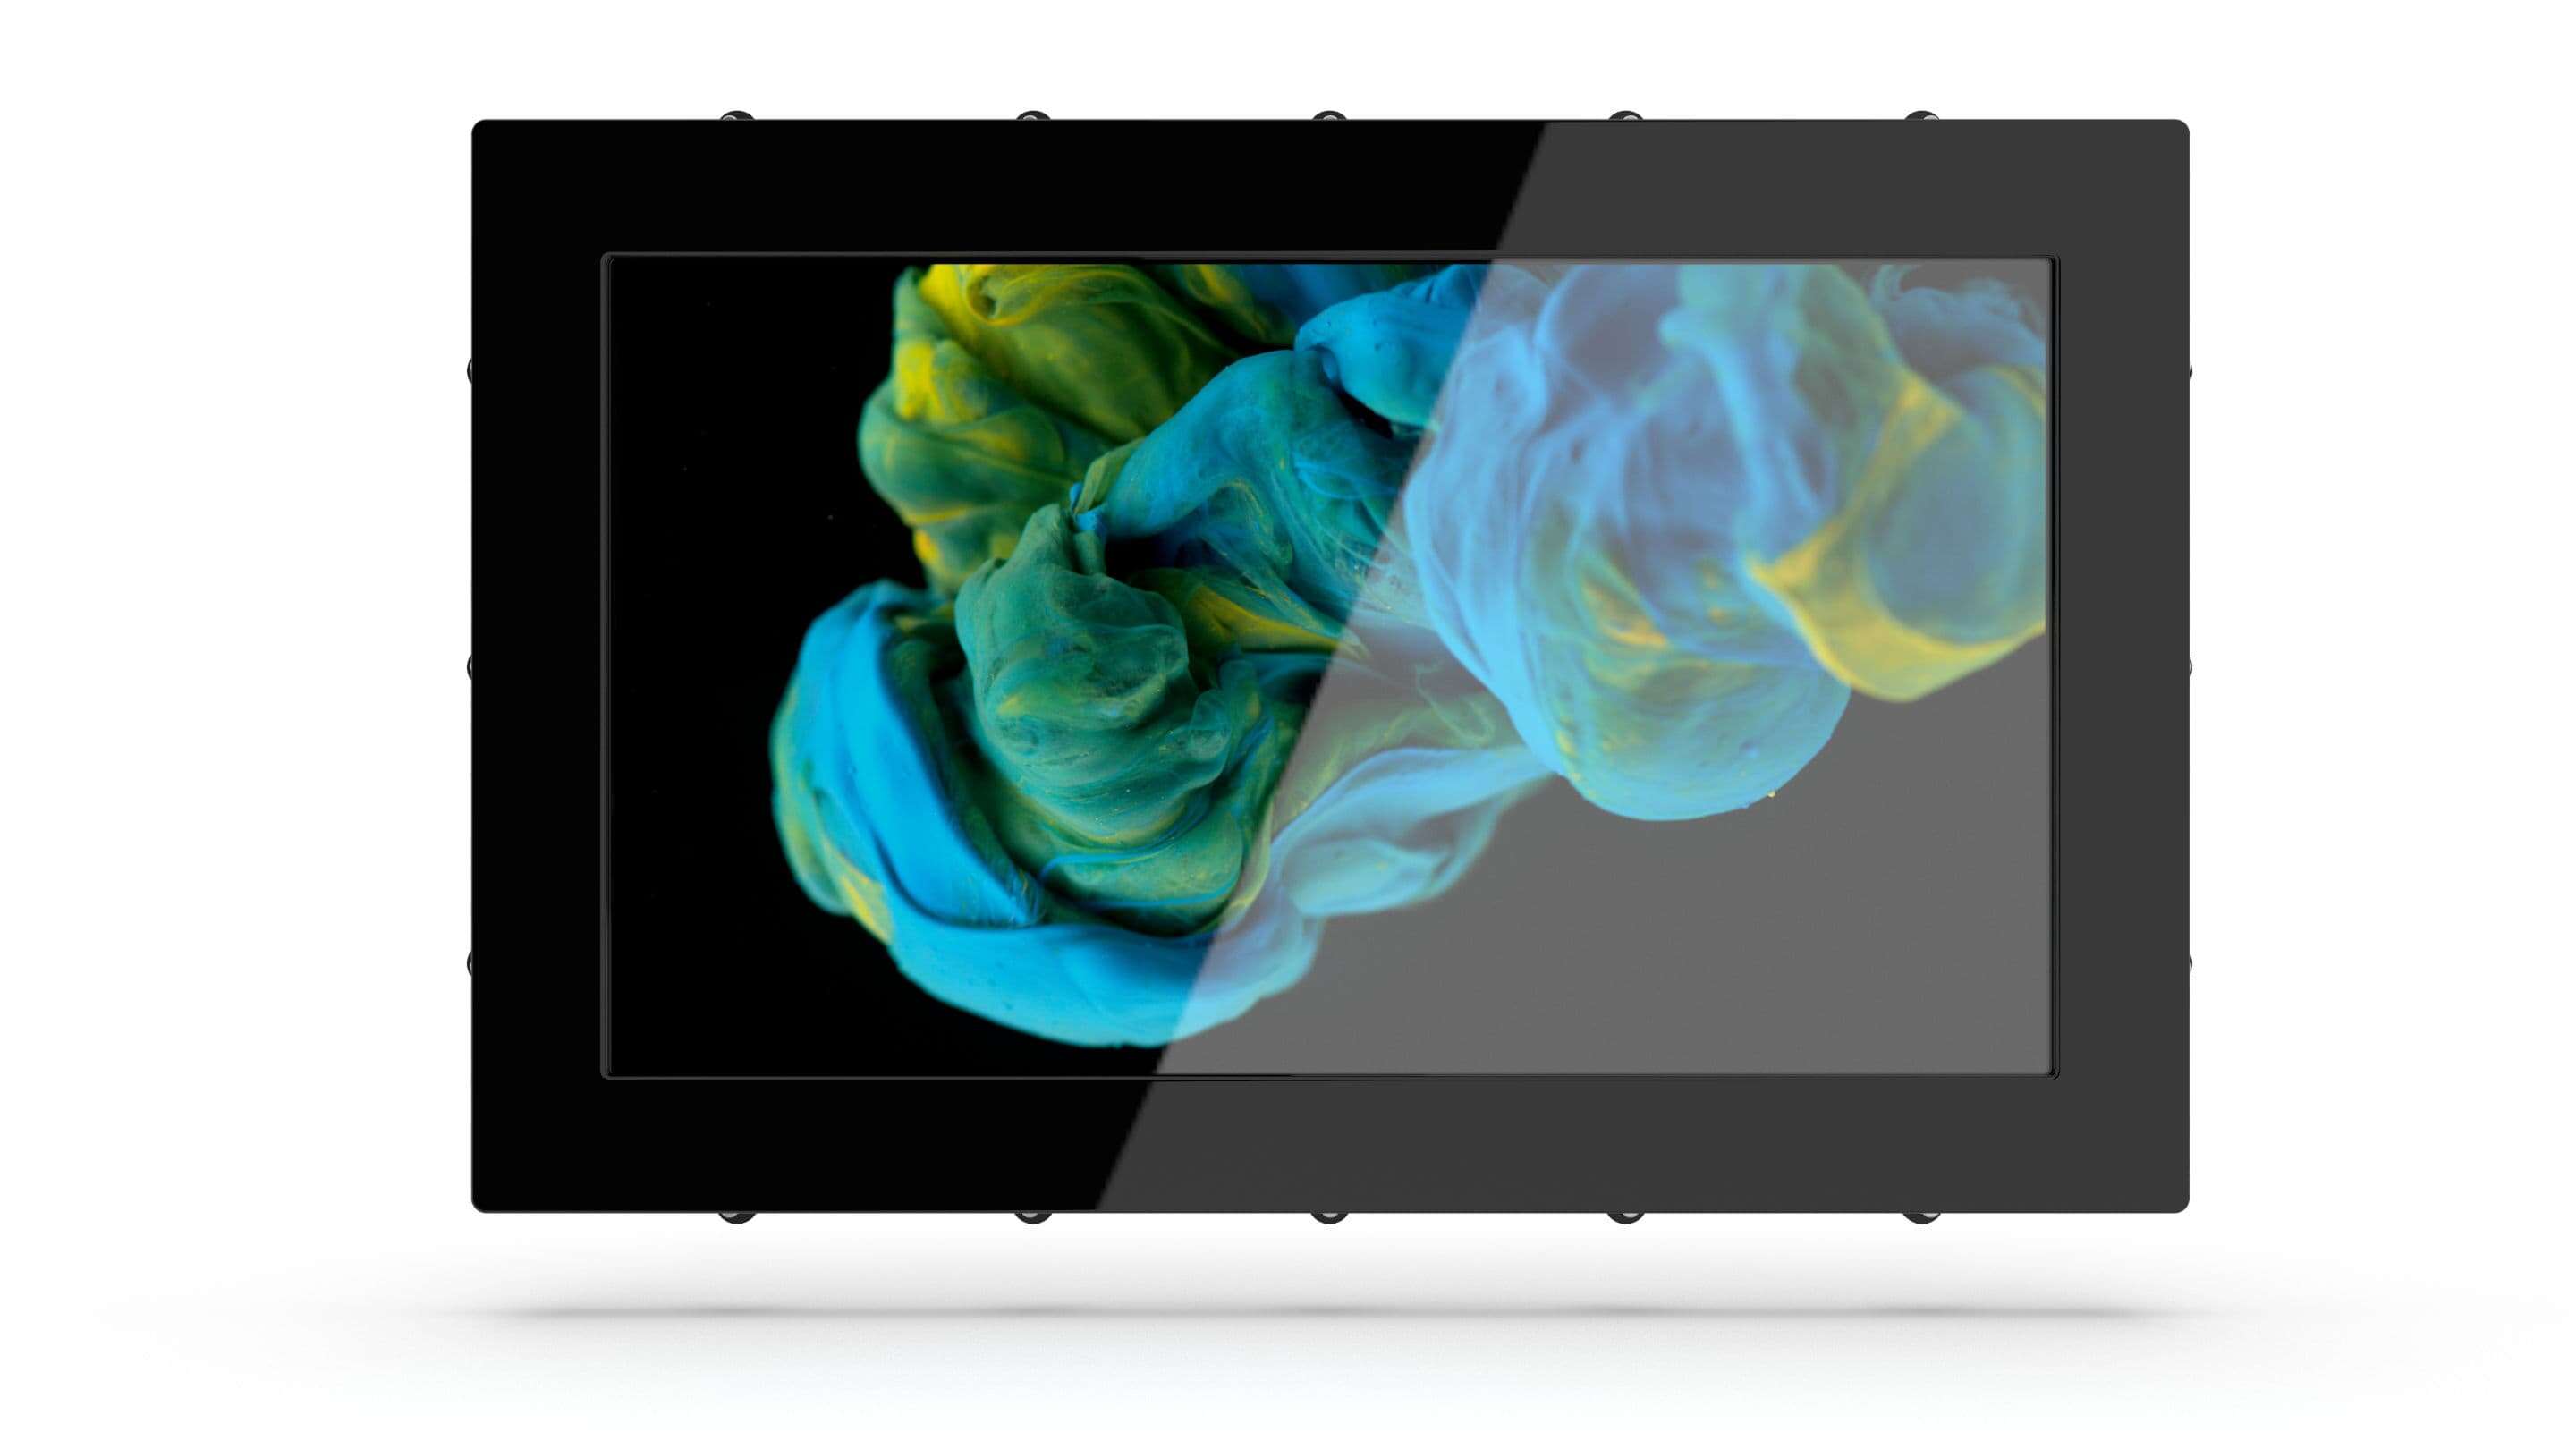 Home - Industrial Monitors a black tablet with a screen showing blue and yellow paint